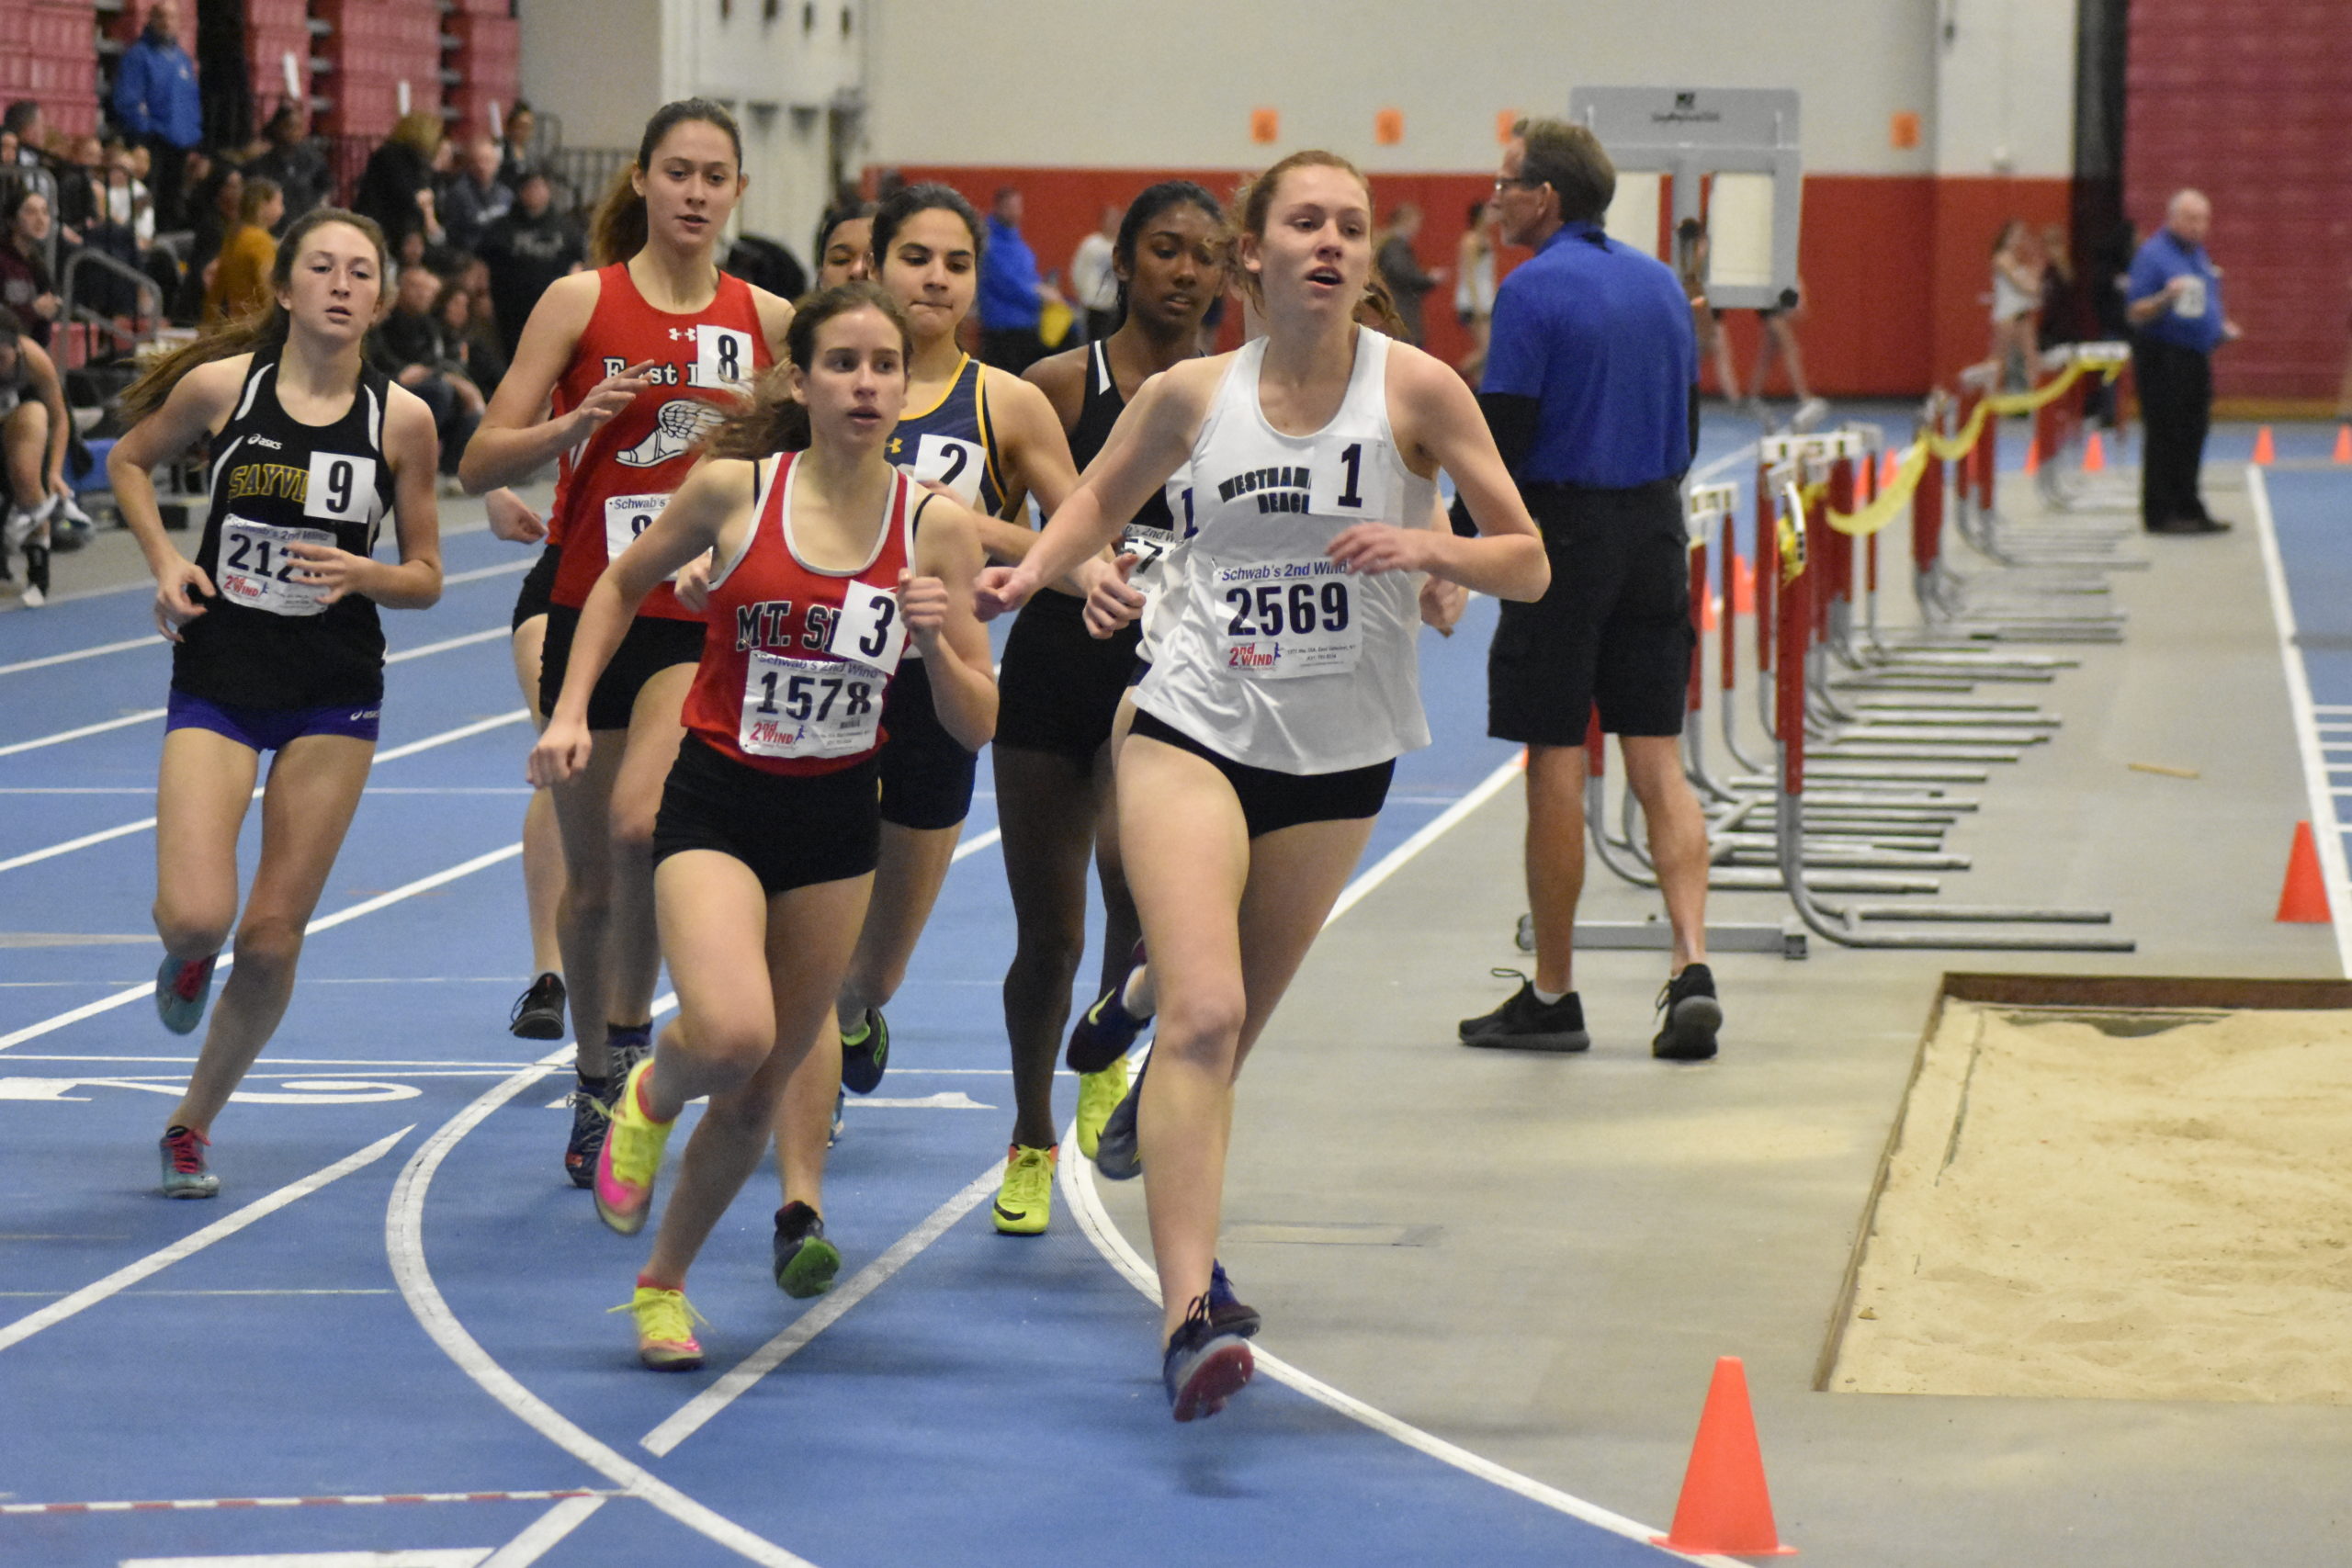 Jackie Amato placed second in the 1,000-meter race, fourth in the 1,500-meter race and helped the 4x400-meter relay team place second.